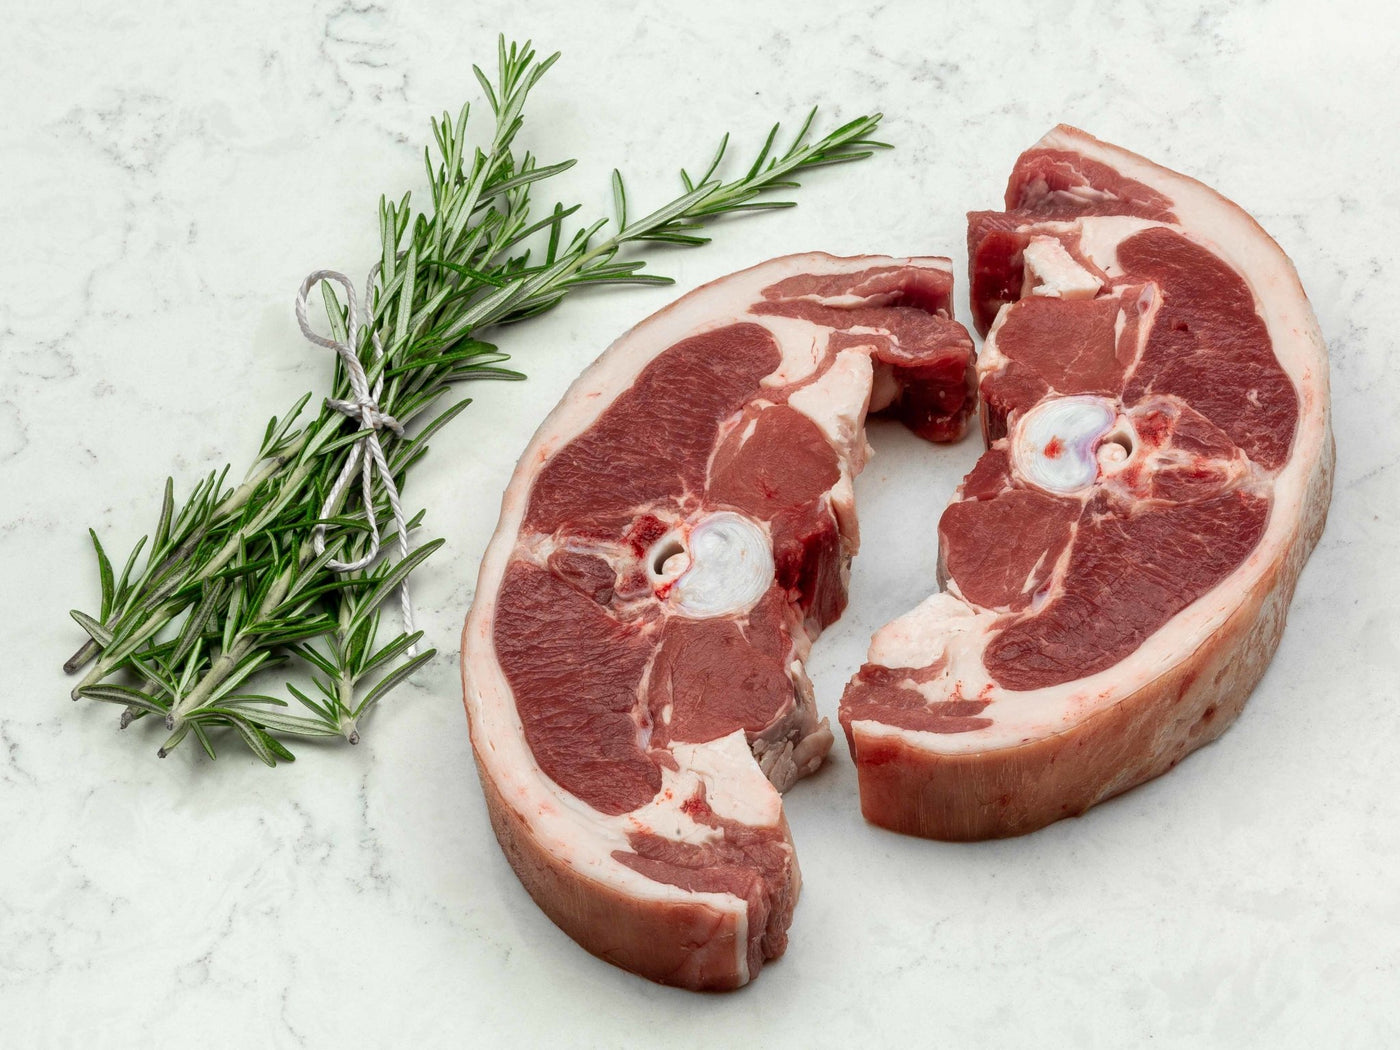 7 Day Dry-Aged, Grass Fed Barnsley Chops - Lamb - Thomas Joseph Butchery - Ethical Dry-Aged Meat The Best Steak UK Thomas Joseph Butchery